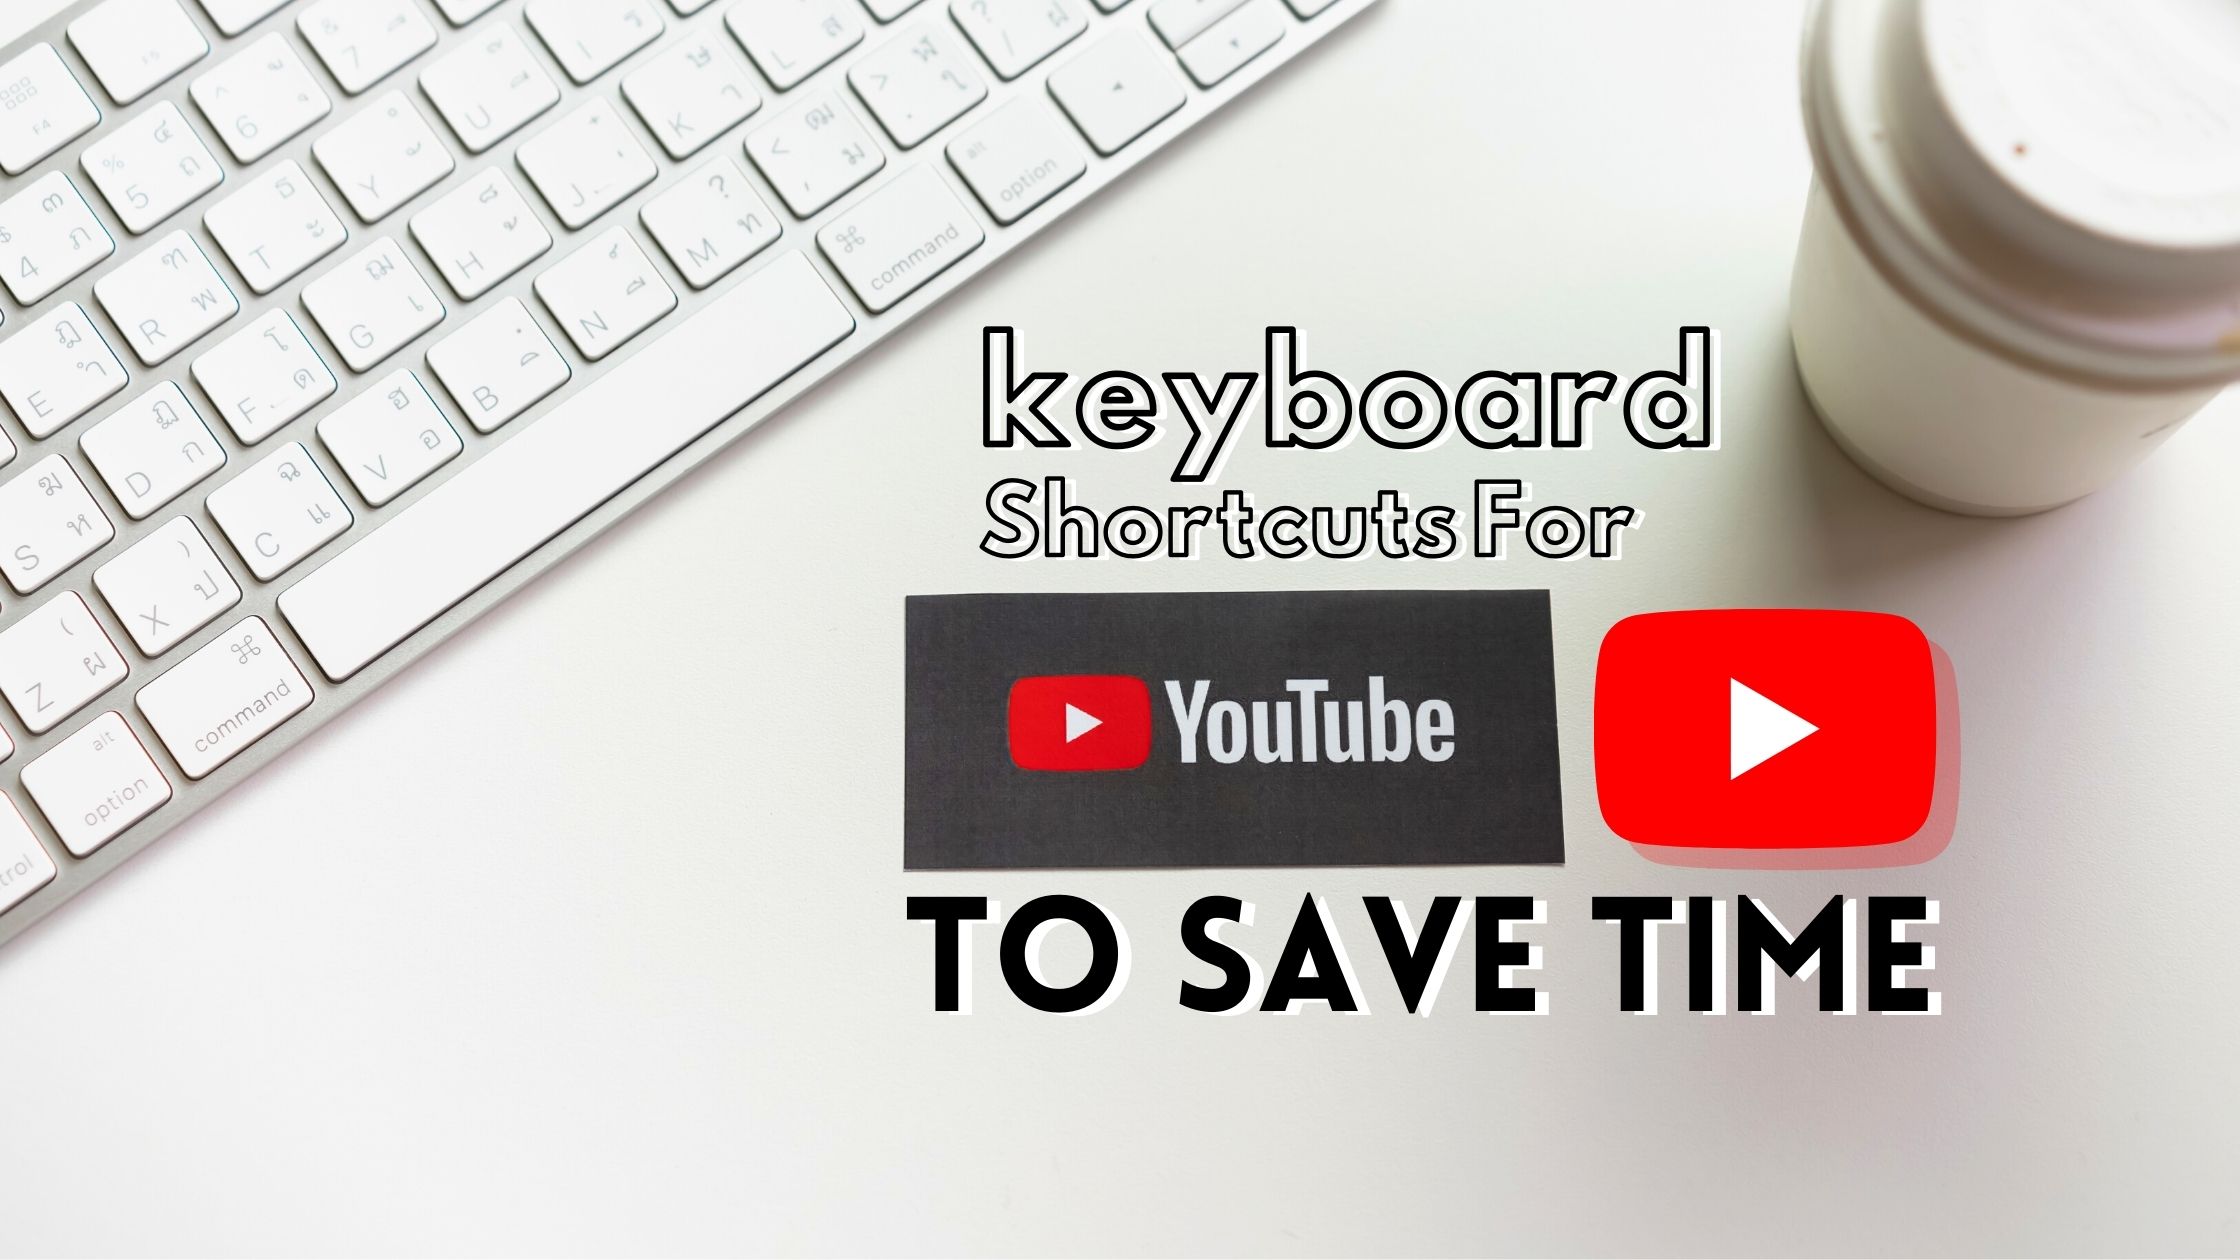 keyboard Shortcuts For YouTube to Save Time